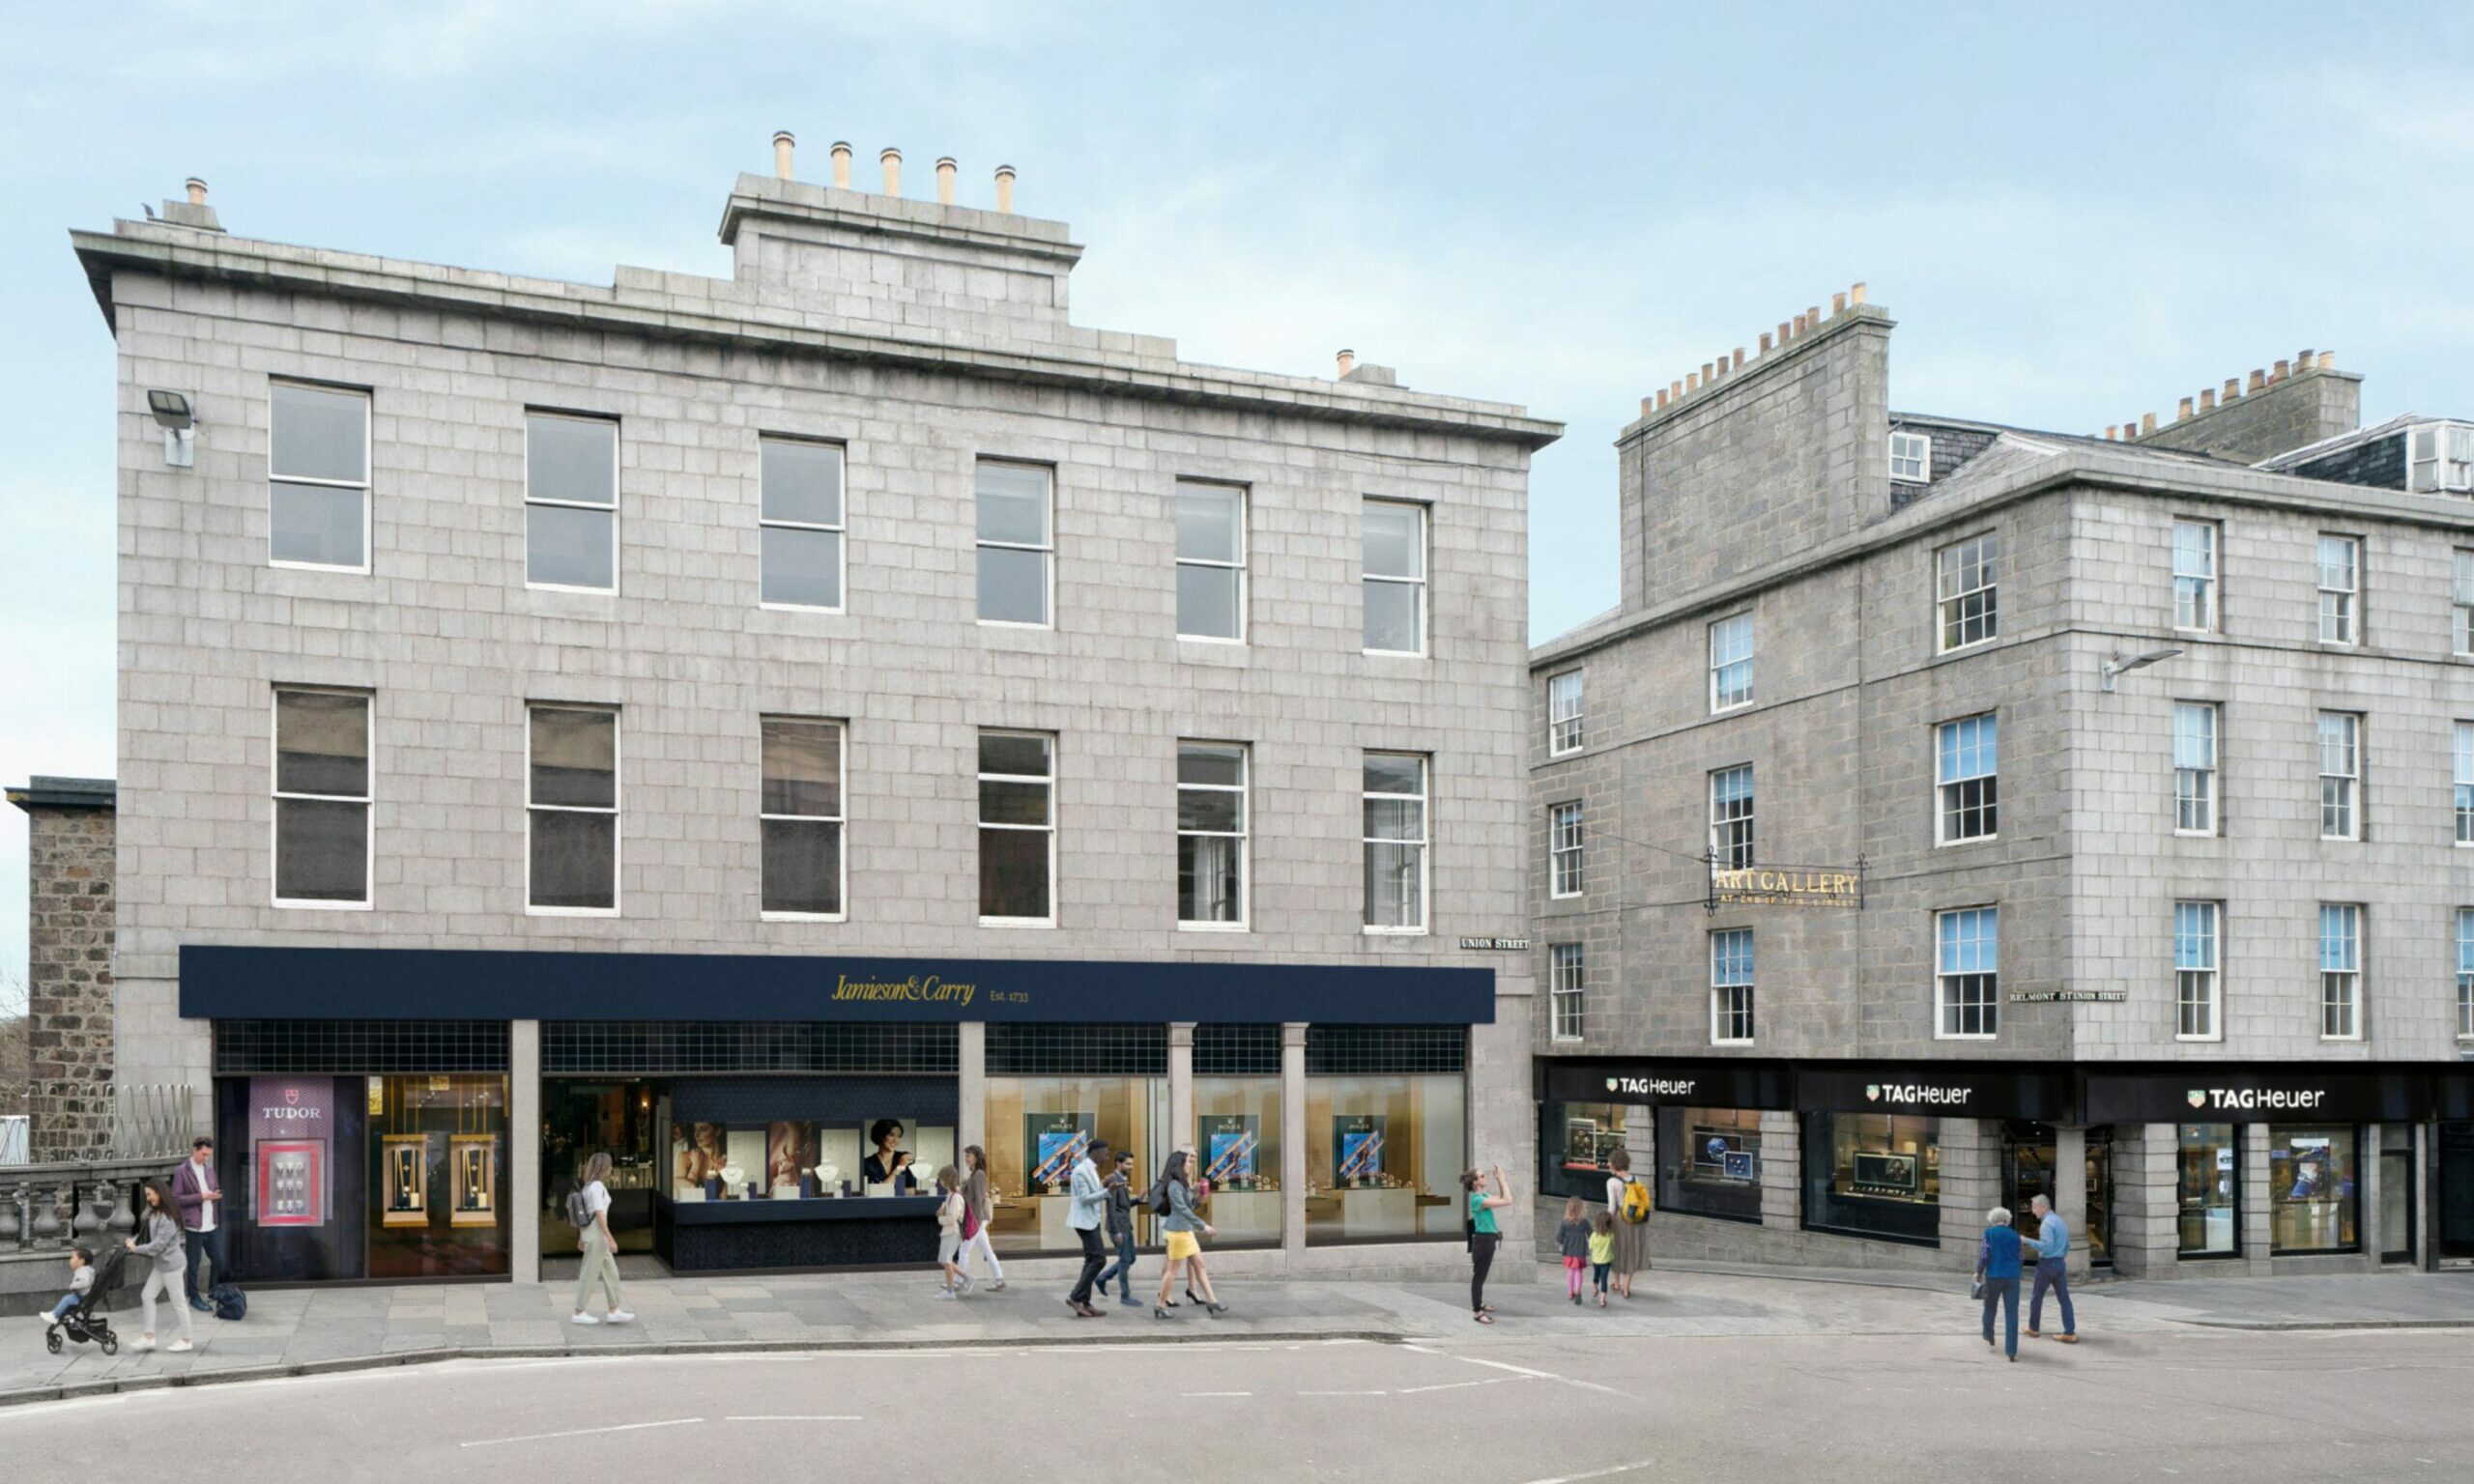 38 and counting: The empty shops next door to Jamieson and Carry on Union Street are not counted by Bob Keiller, as the jeweller has designs for high-end expansion. Image: Jamieson and Carry